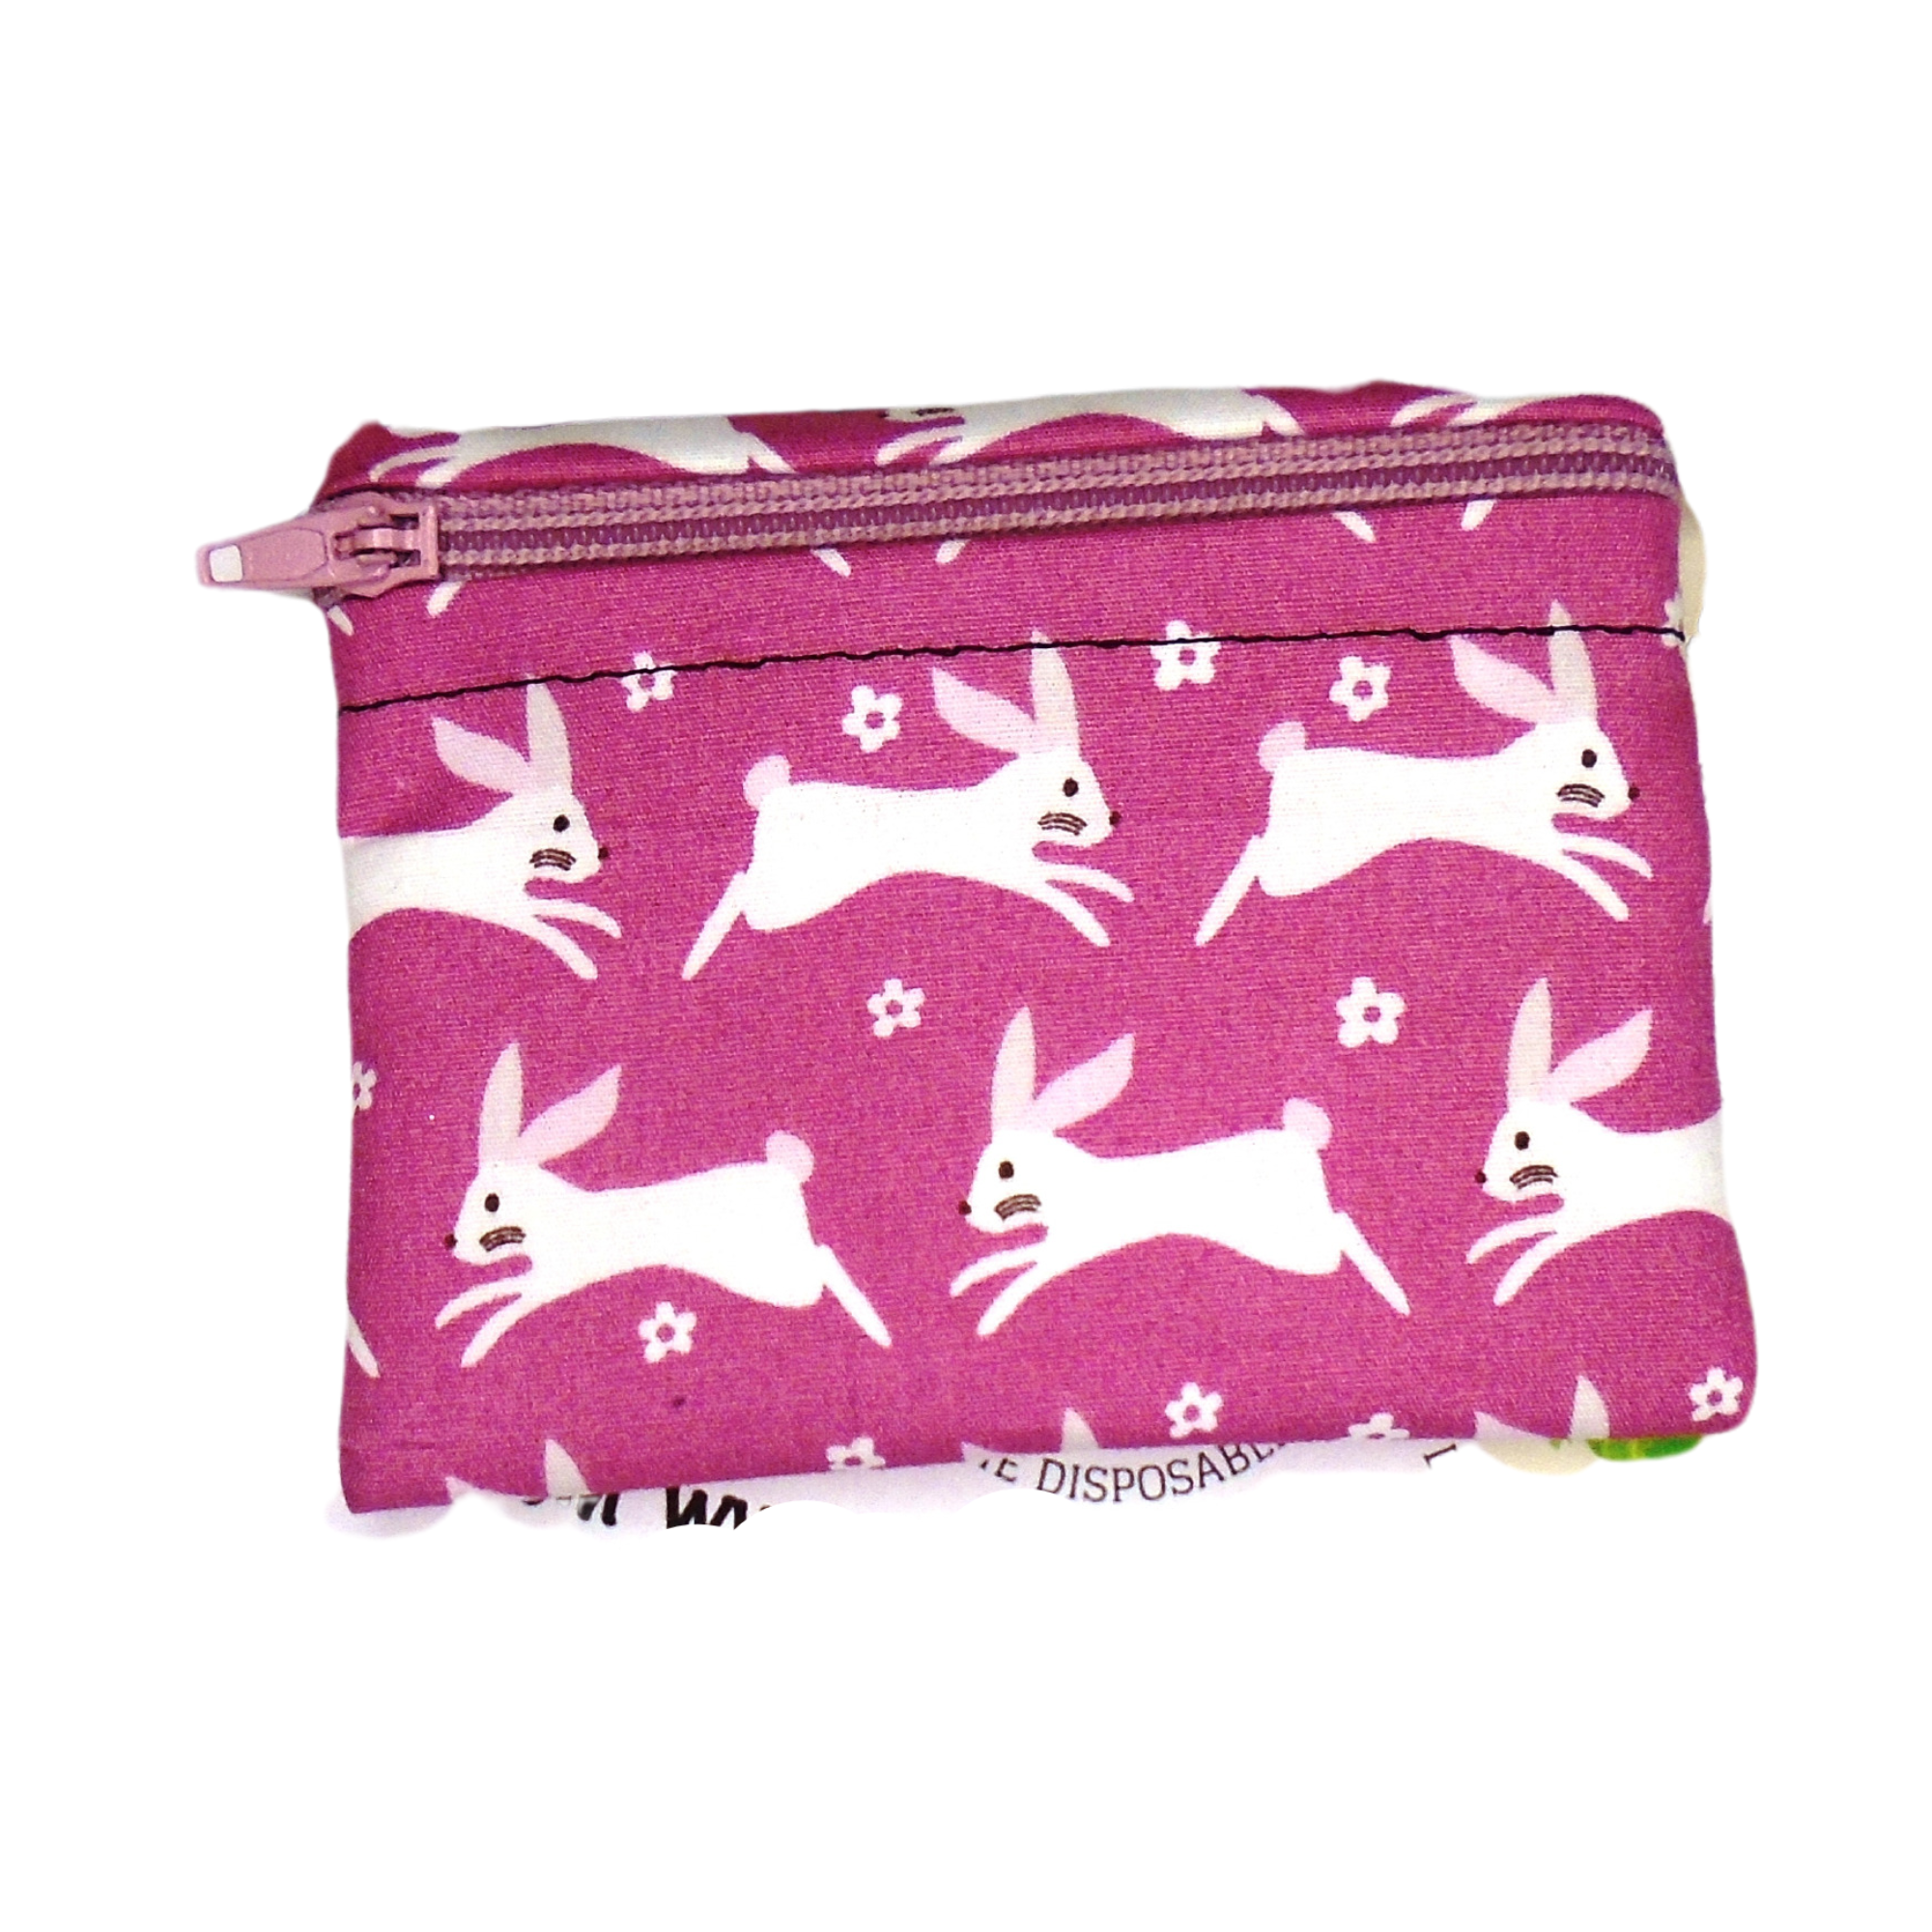 Pink Bunny - Snack Bag - Small Pippins Waterproof Pouch for Food, Makeup and more, Eco-Friendly and Washable Lunch, Travel, and Storage